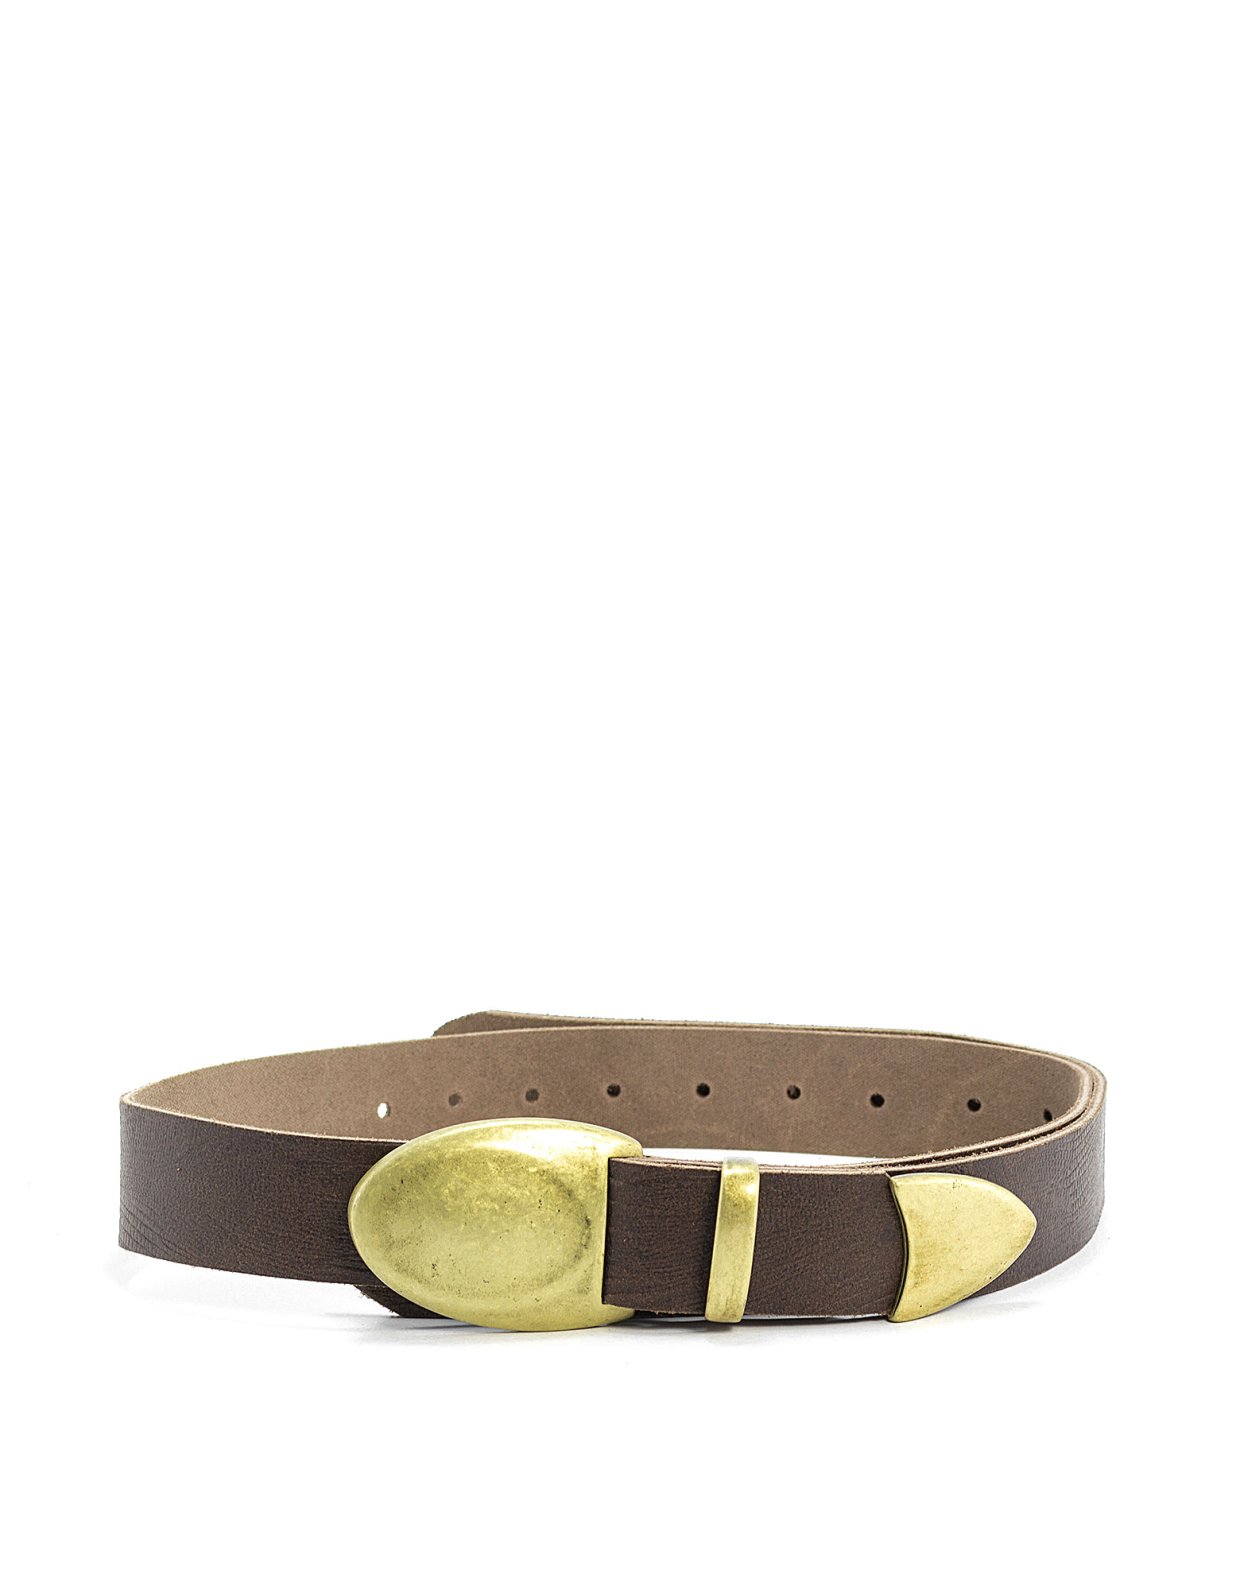 Individual Art Leather Let it be belt brown